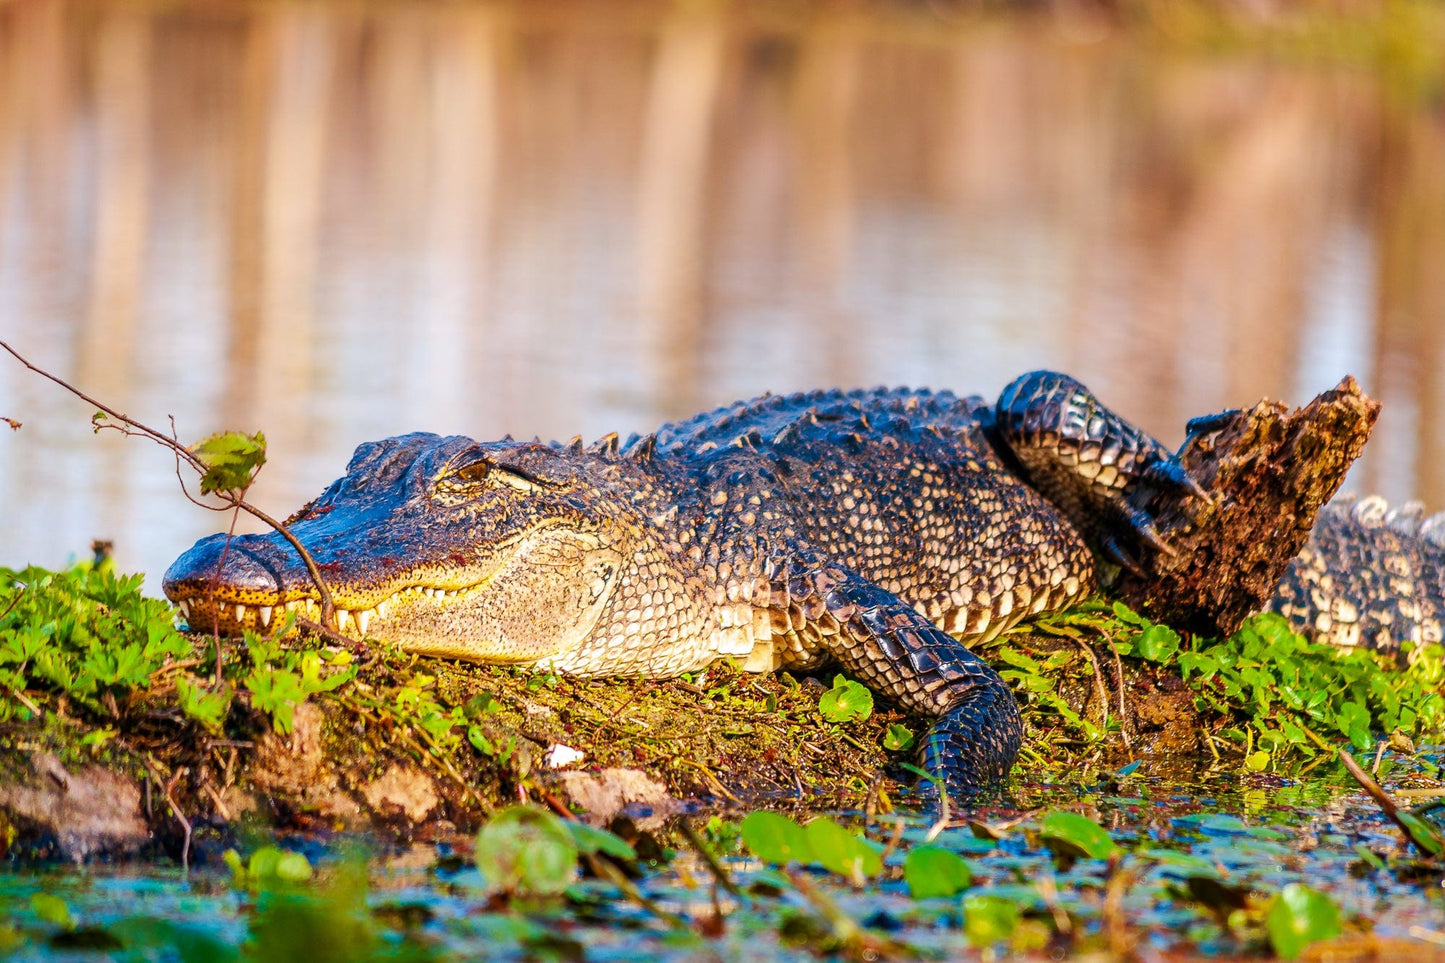 Sunny Days at Brazos Bend, An American Alligator | Wildlife Puzzle | 250, 500, 1000 Pieces